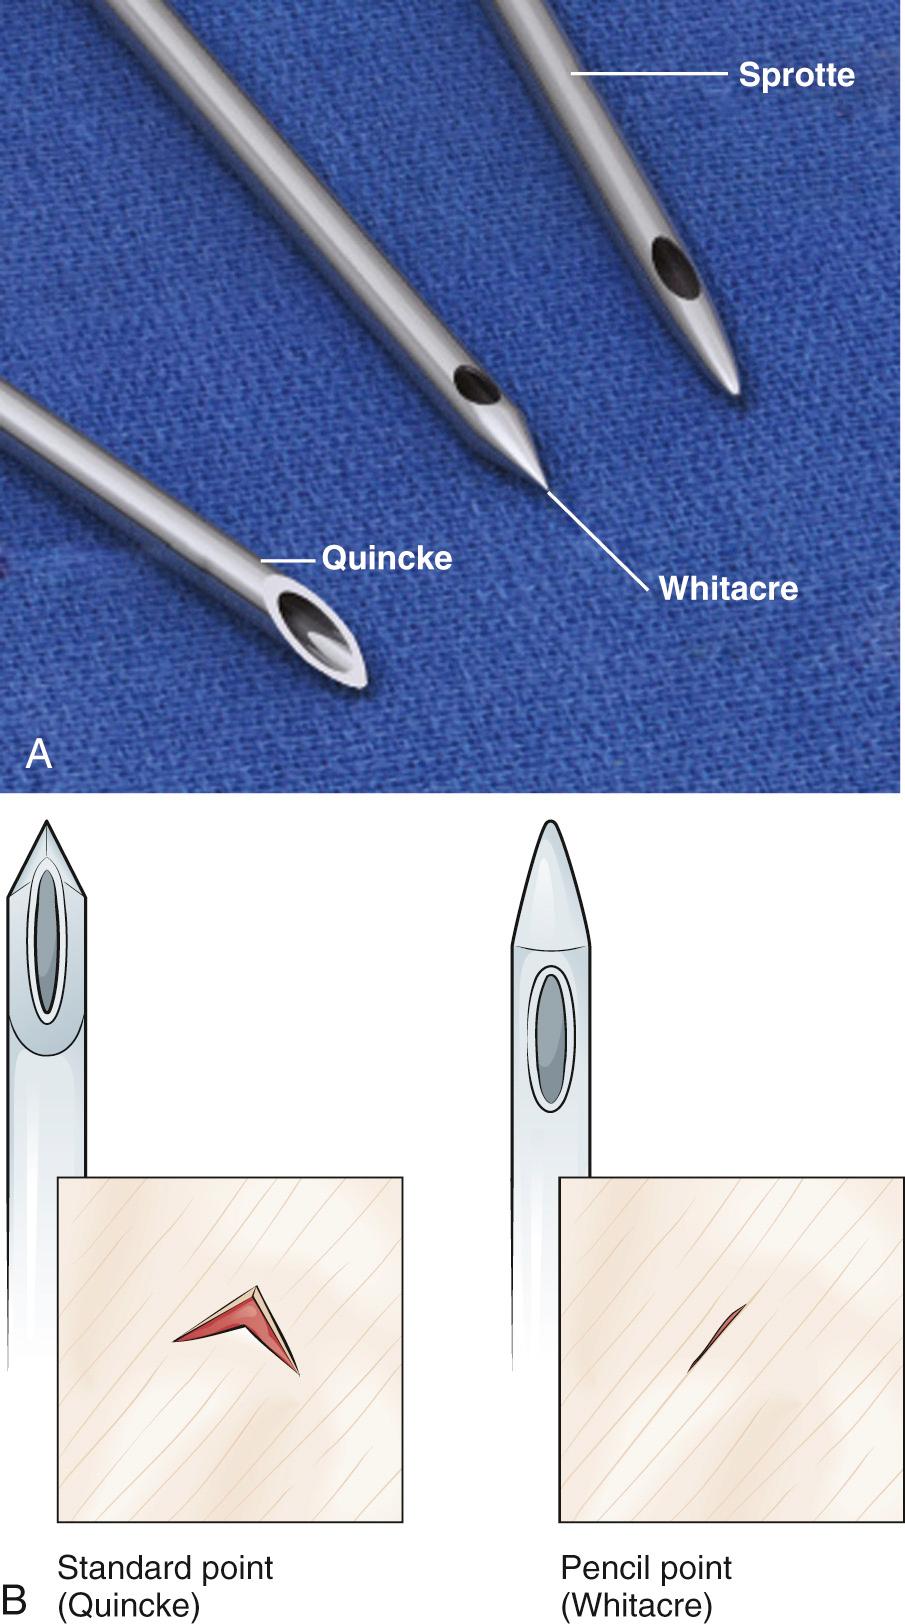 Figure 60.2, A, Various spinal needles. B, Penetration of the dura by Whitacre (pencil-point) and Quincke (cutting) needles. The Whitacre needle separates the fibers of the dura without cutting them, whereas the Quincke needle cuts the fibers. The Quincke needle leaves a hole in the dura through which cerebrospinal fluid can leak until the hole heals several days or weeks later. Use of the Whitacre needle has been associated with a lower incidence of post-lumbar puncture headache.